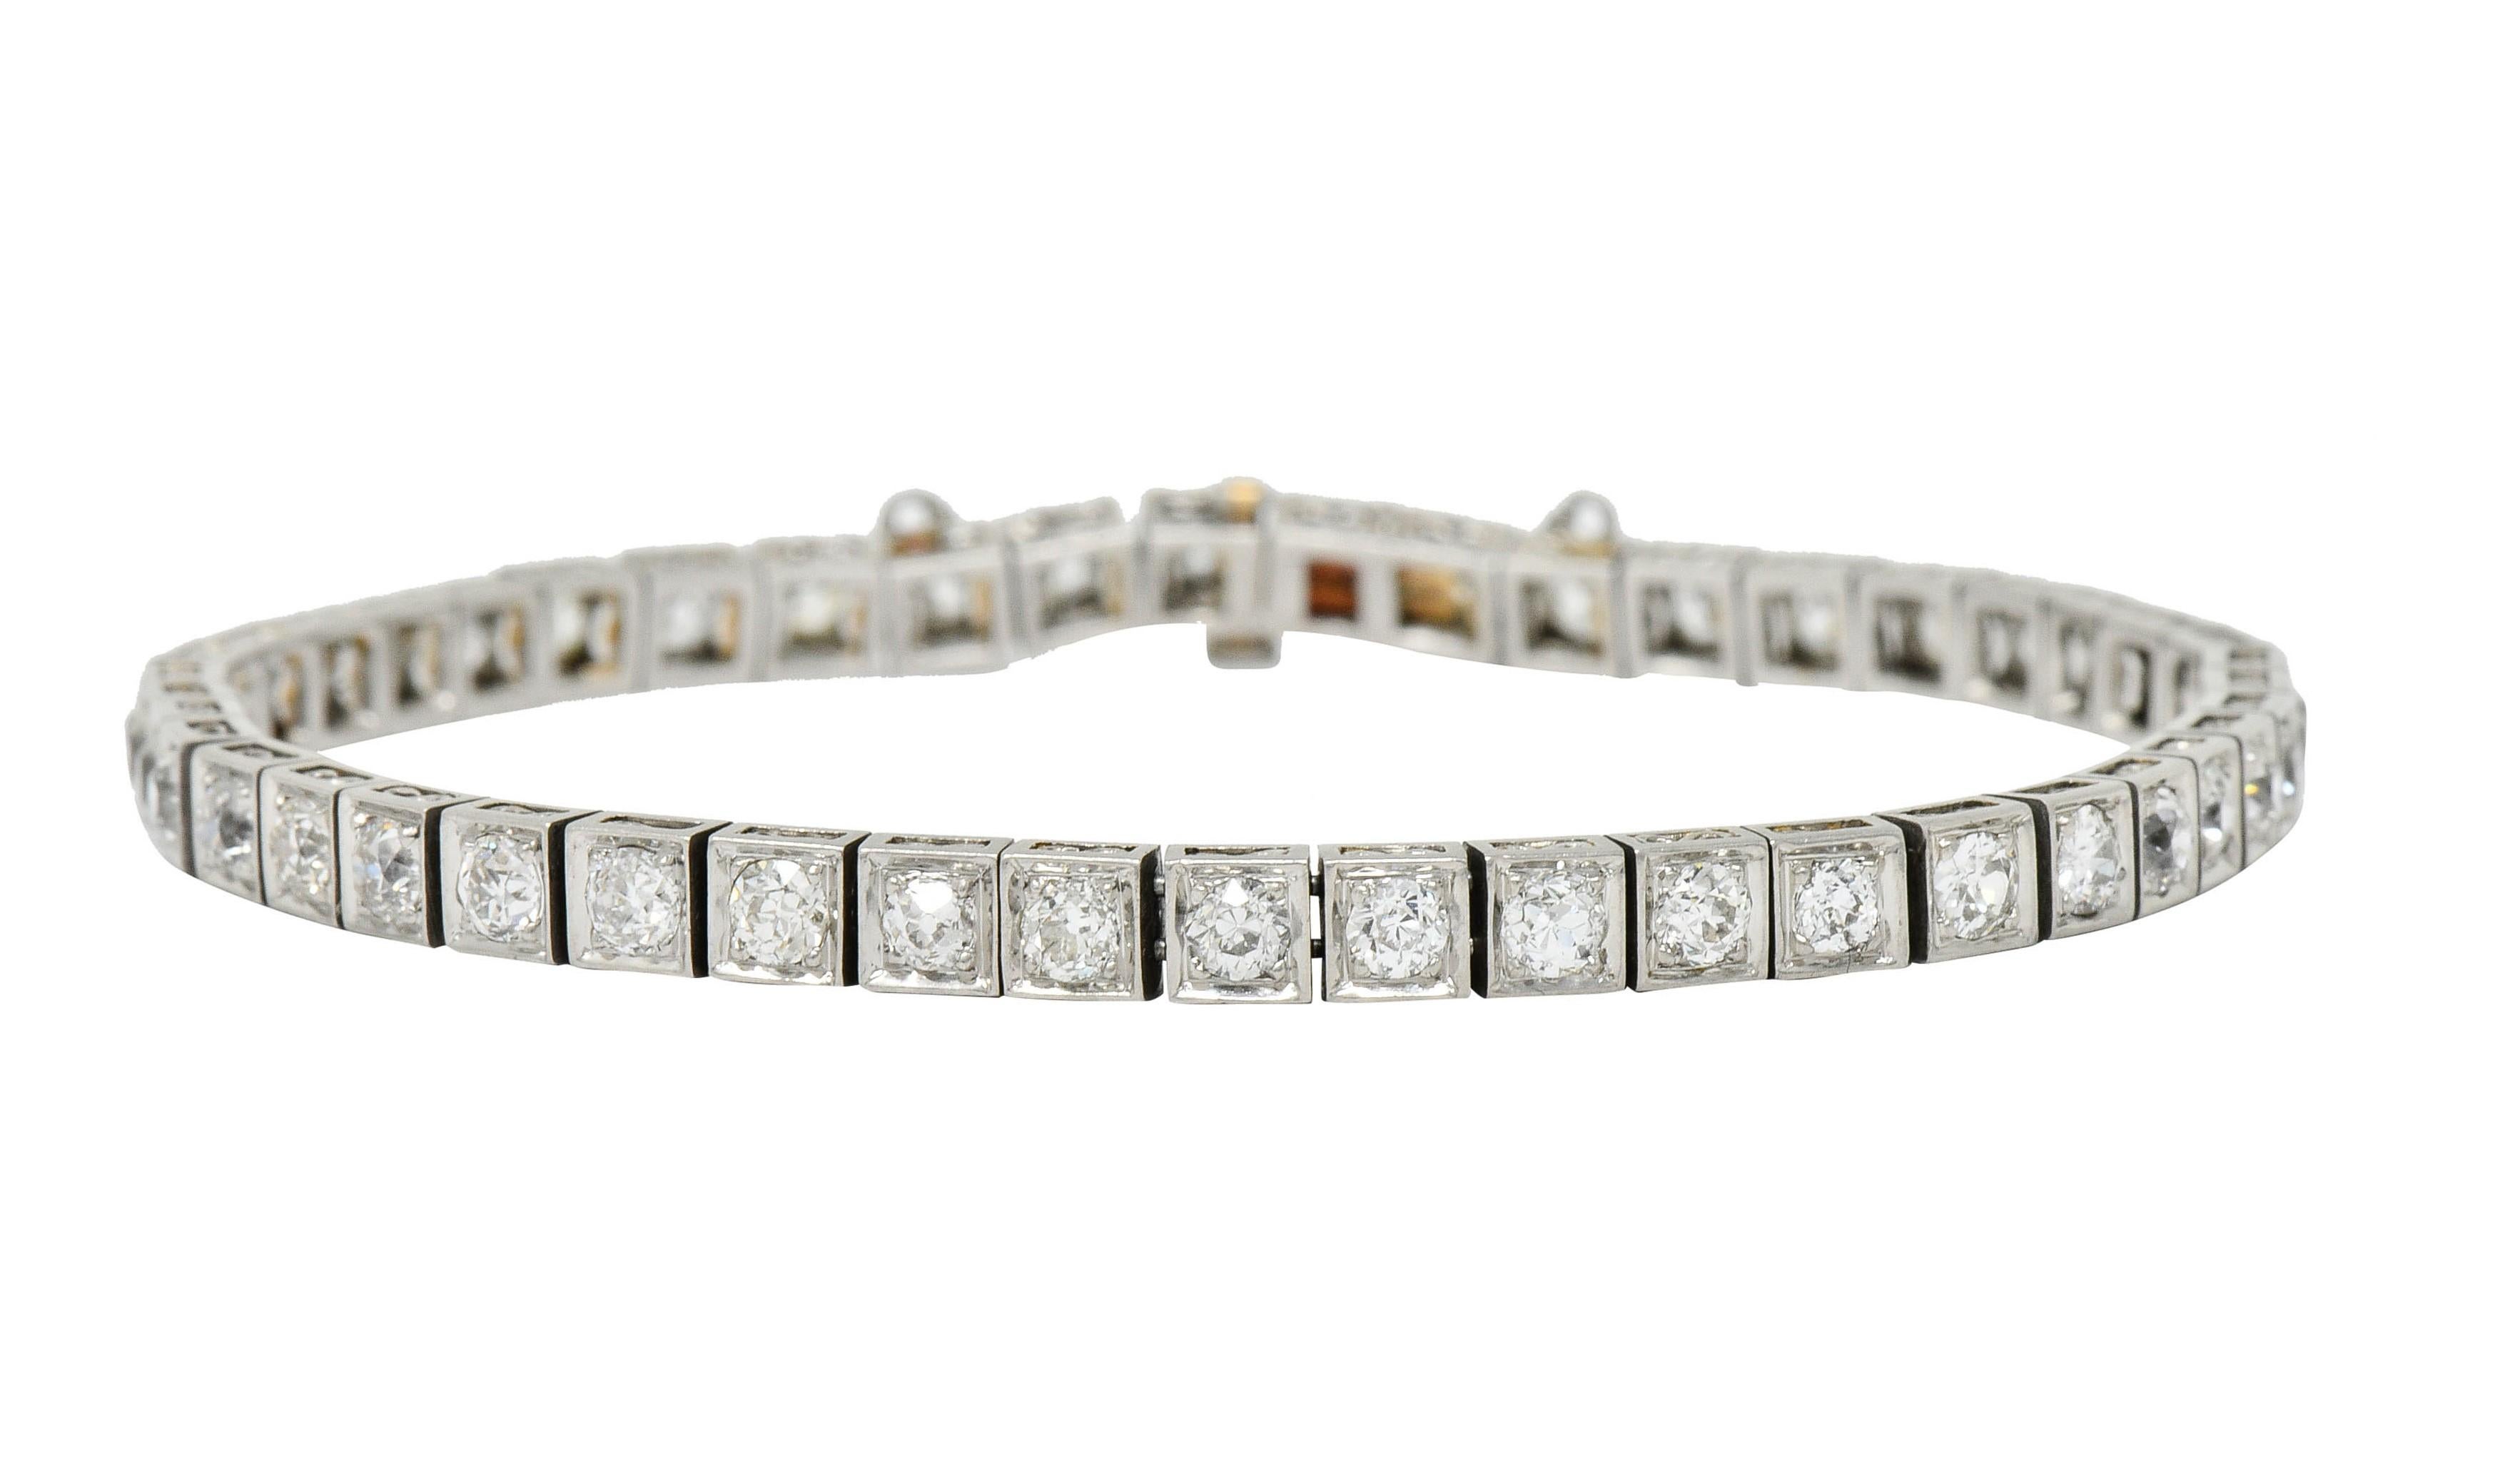 Line style bracelet is comprised of articulated square form links

Featuring old European cut diamonds weighing approximately 4.85 carats total; H to J color with SI and I clarity

Decorated throughout with pierced infinity motif

Completed by a